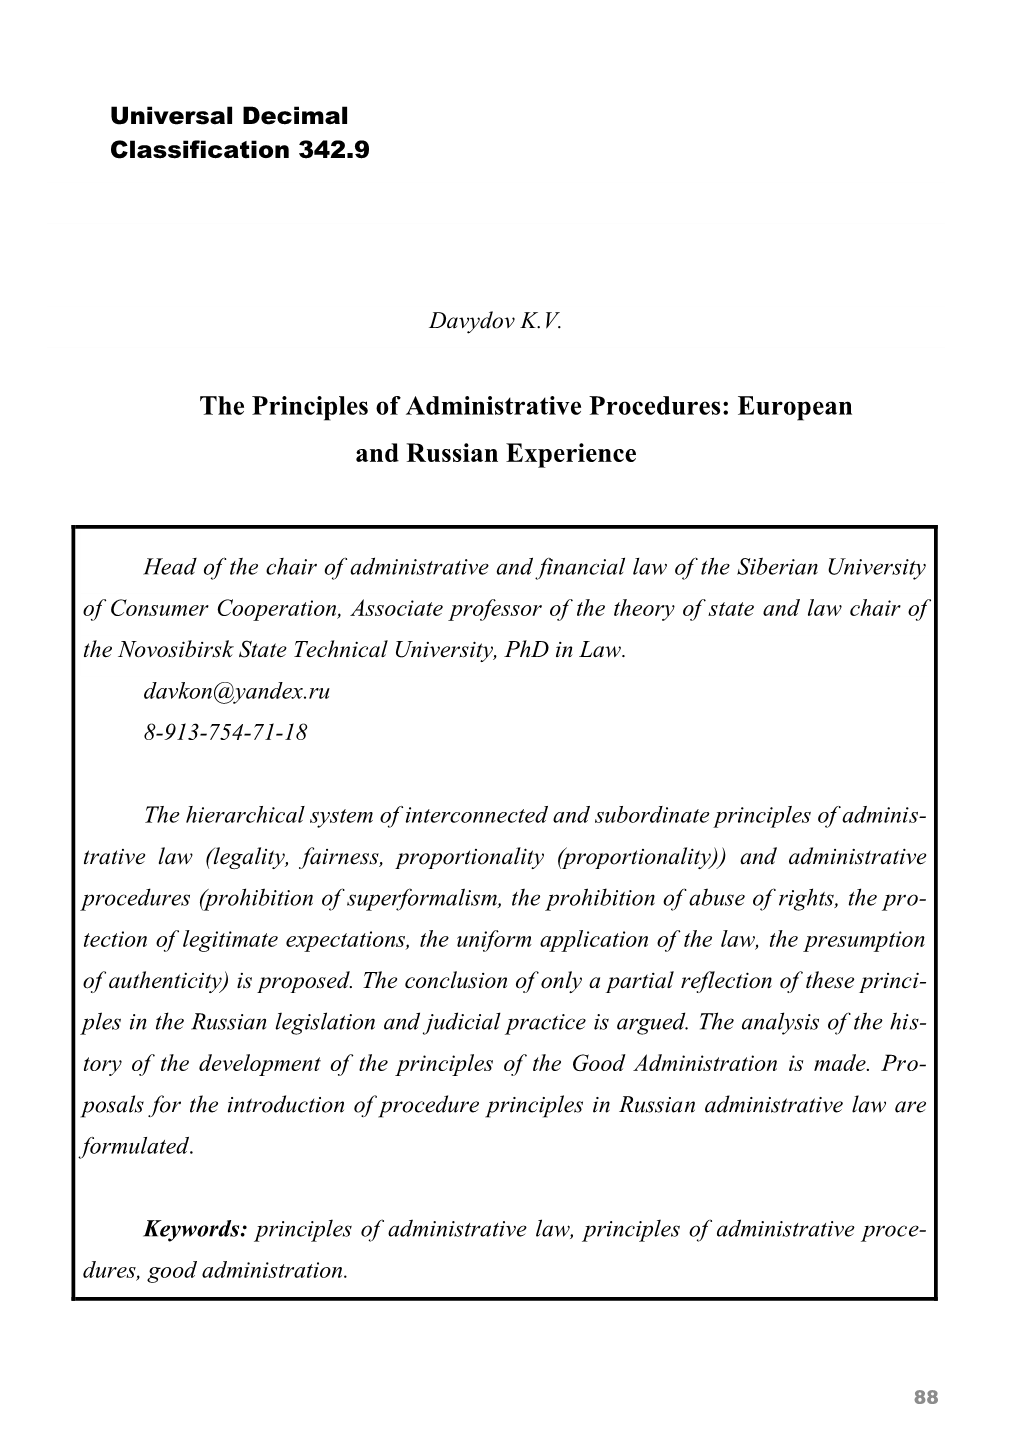 The Principles of Administrative Procedures: European and Russian Experience